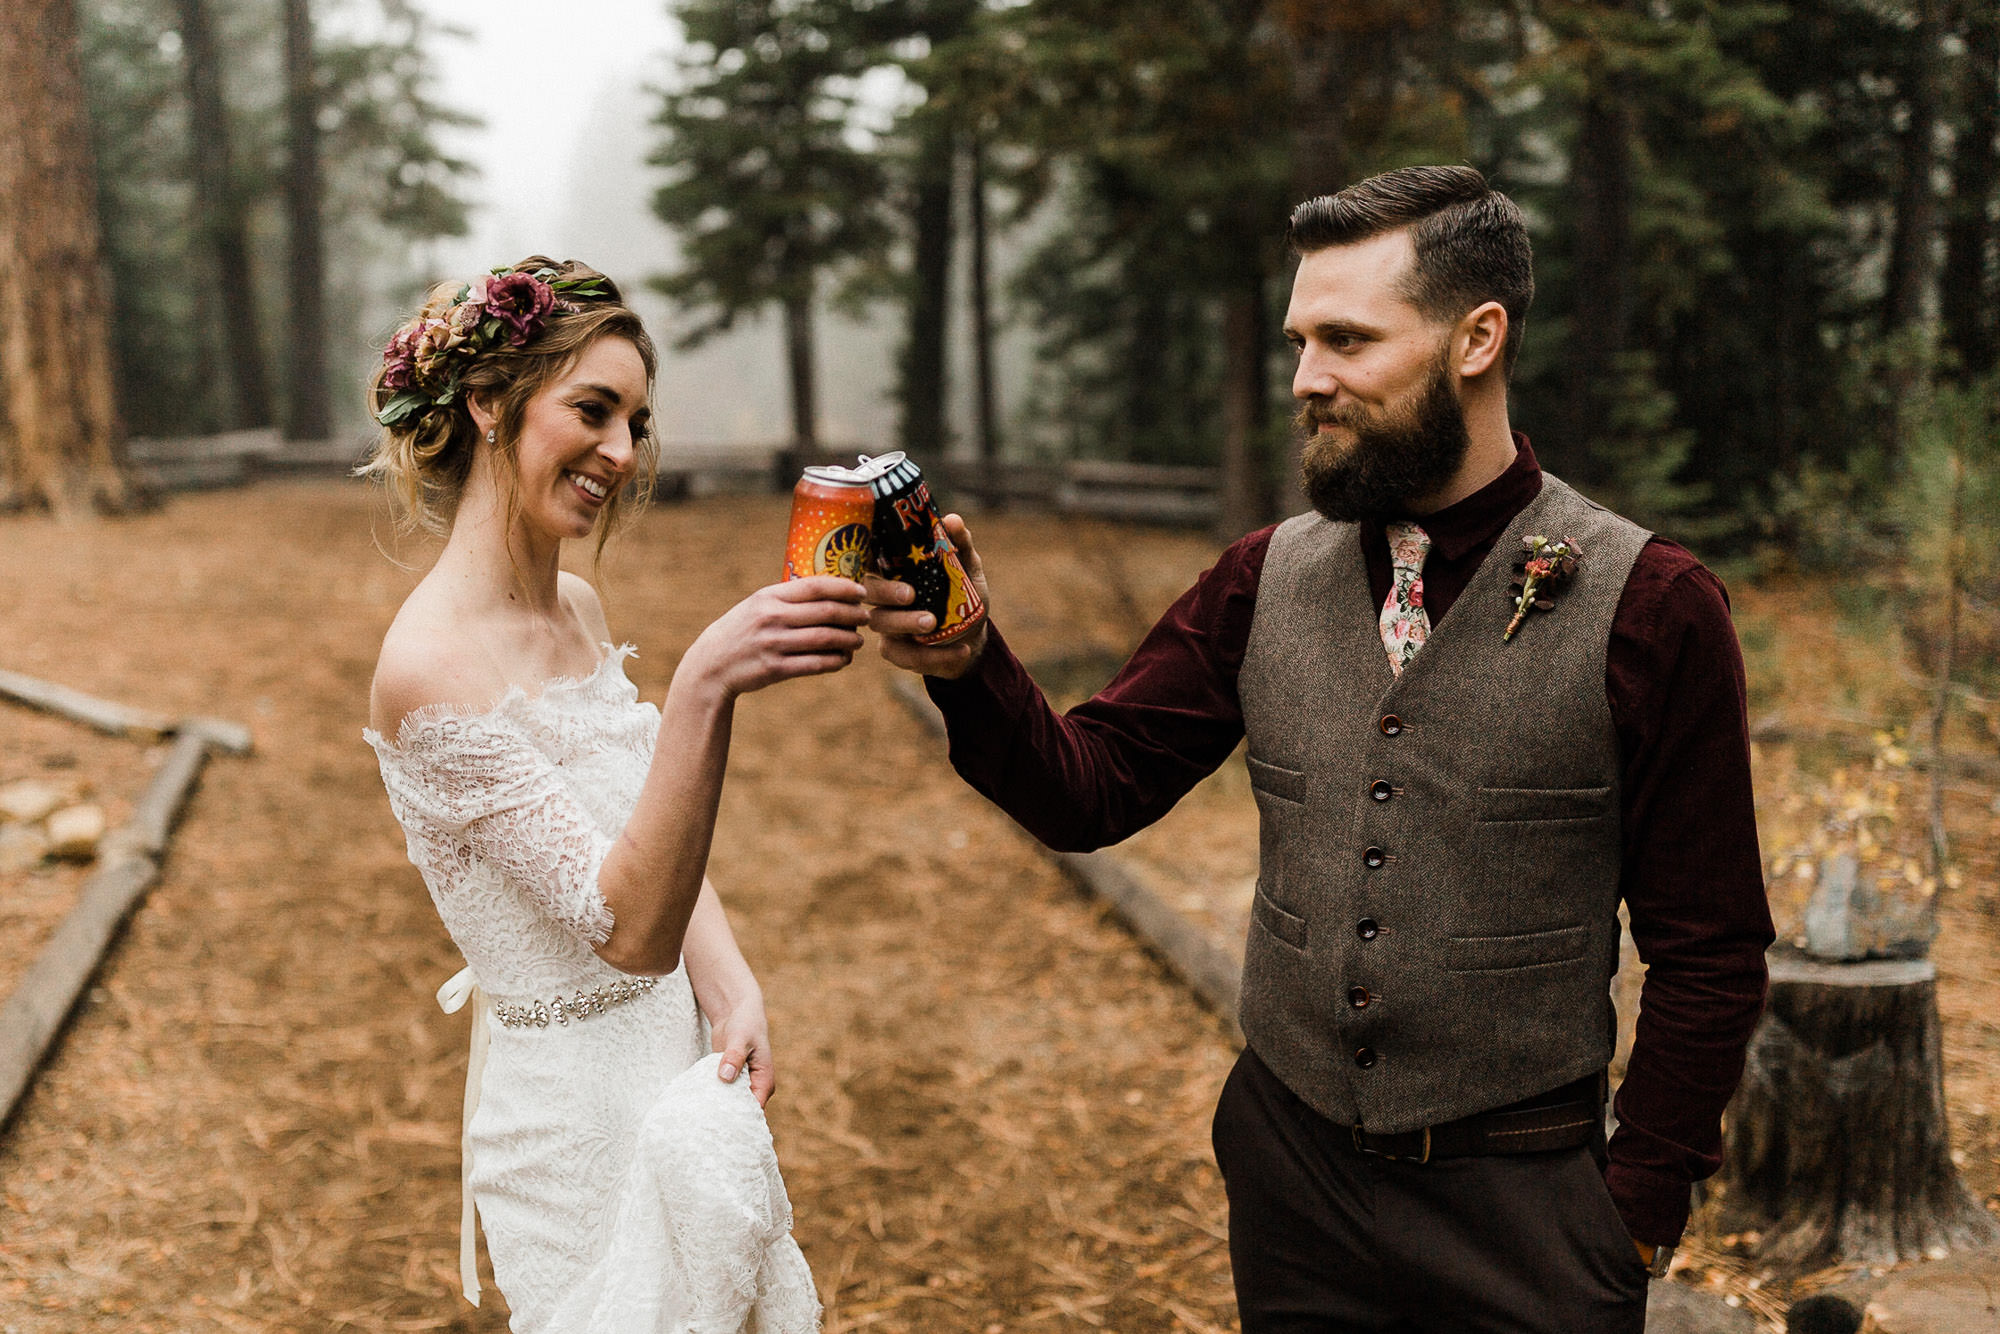 Bride and groom "cheers" with cans of beer in Bend, Oregon